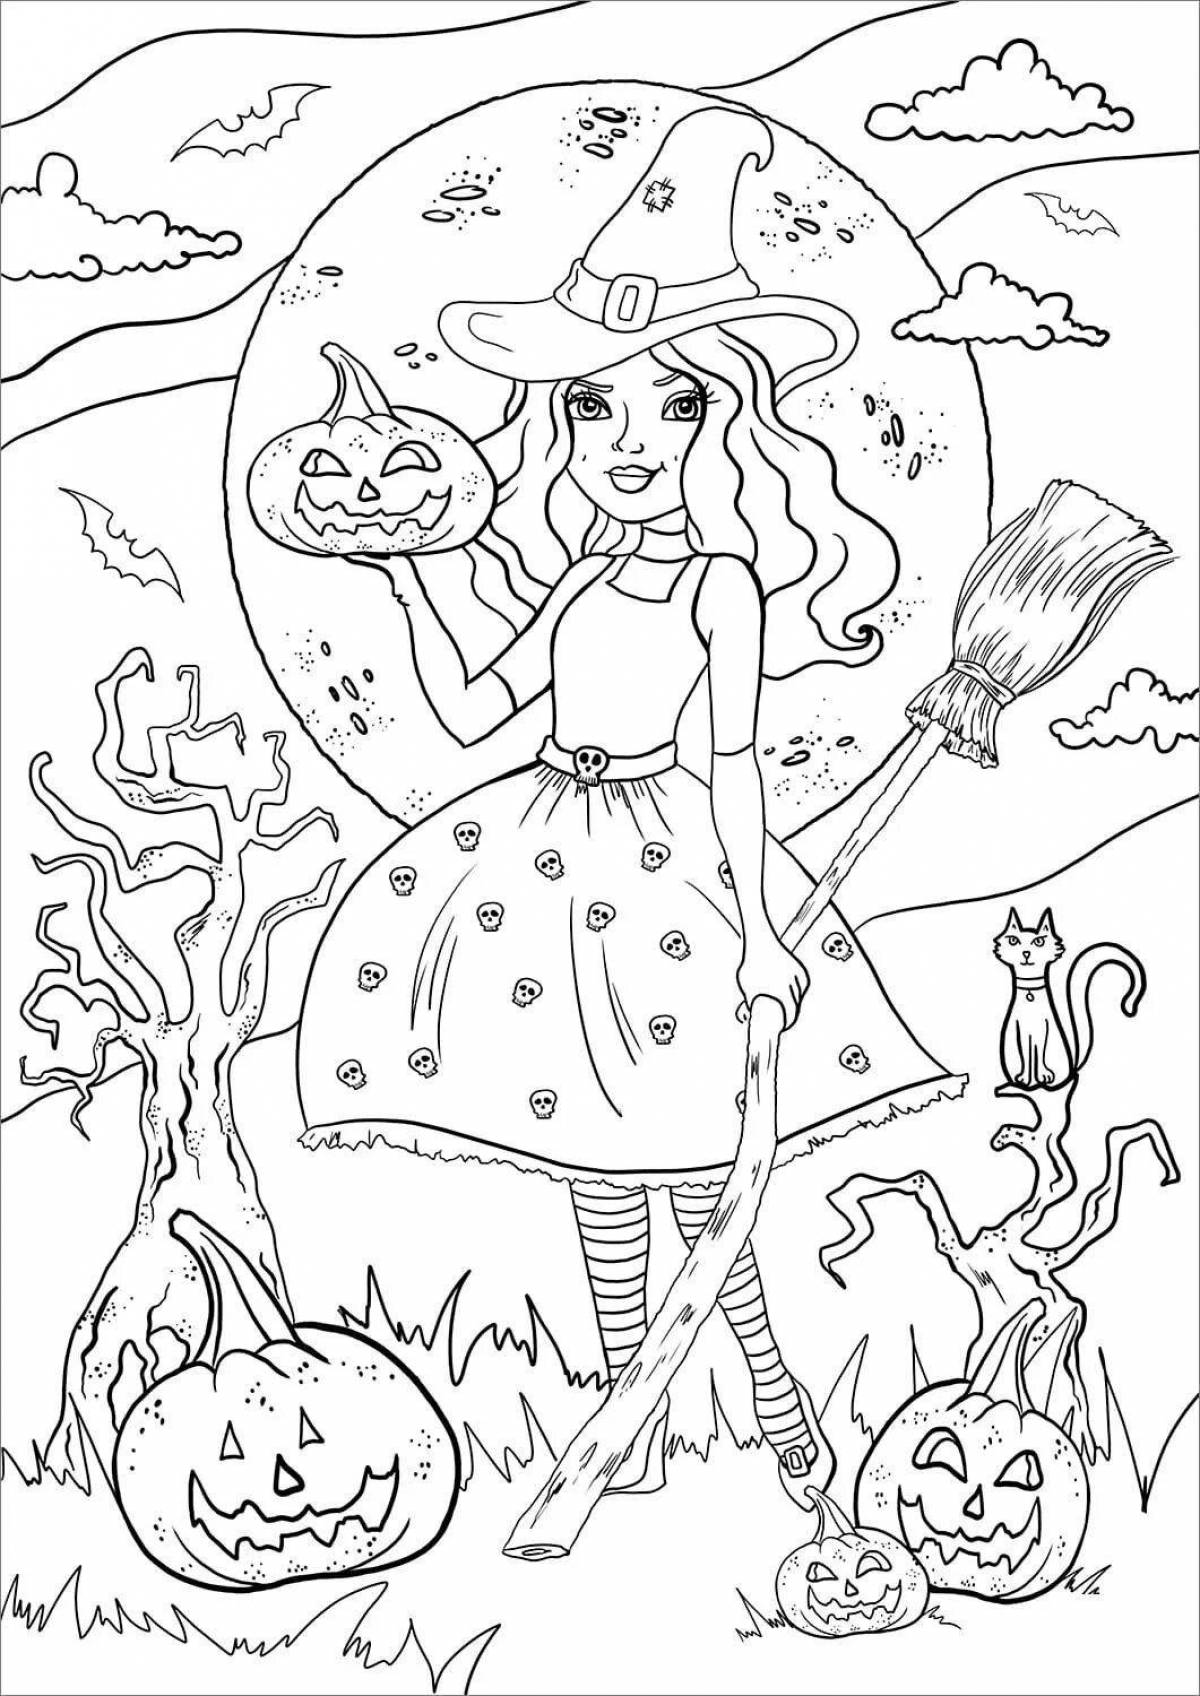 Witch mystery coloring book